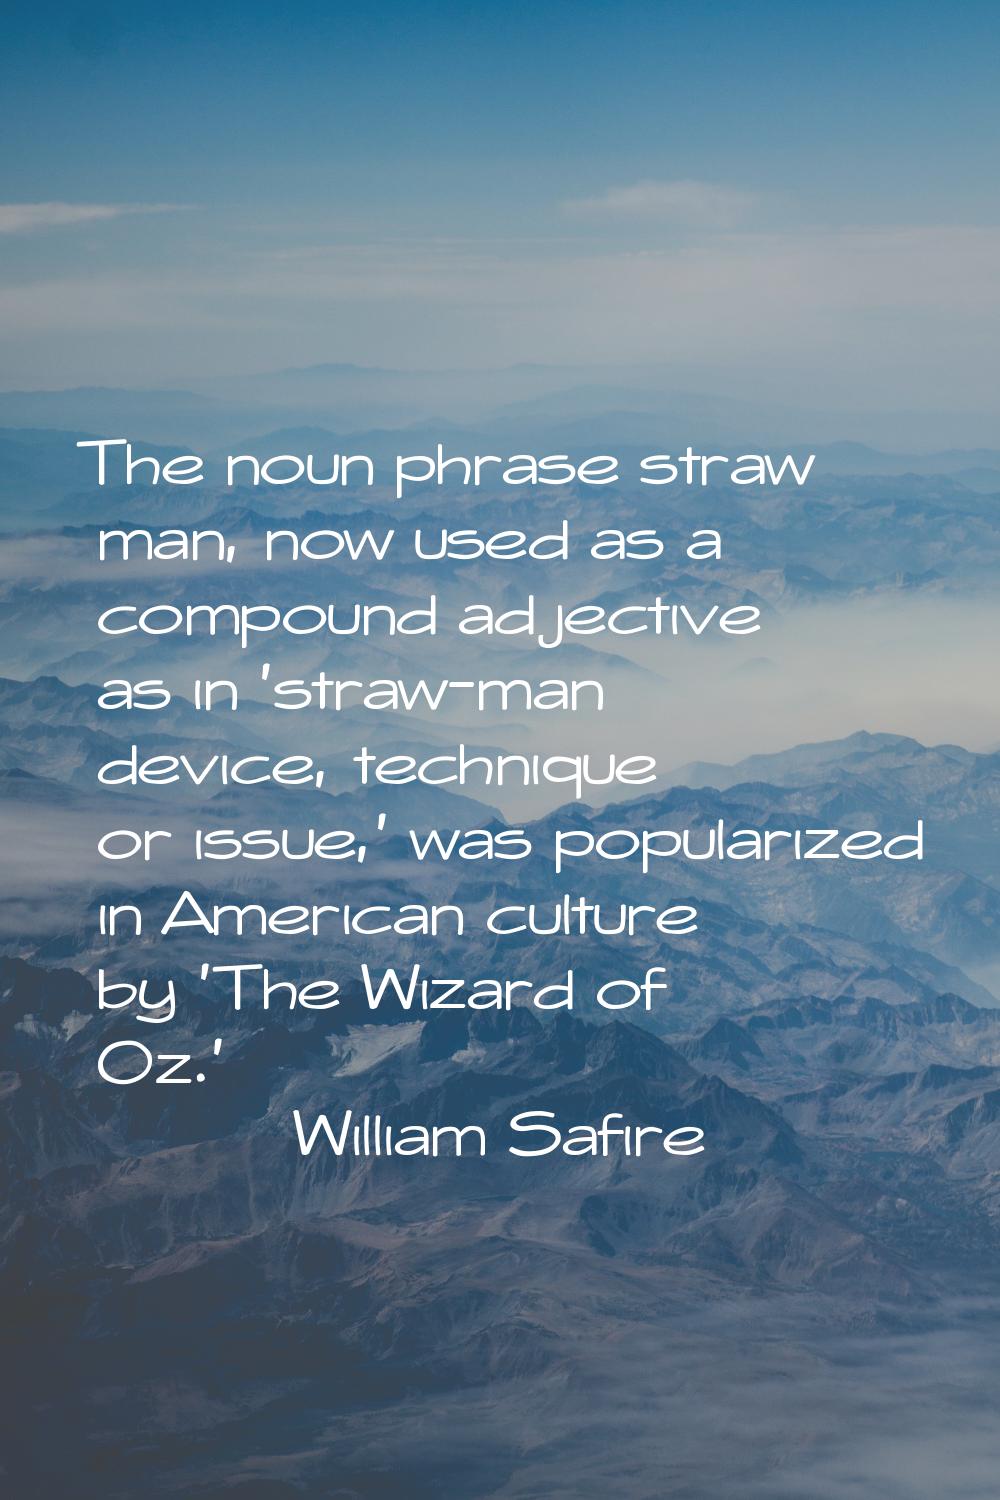 The noun phrase straw man, now used as a compound adjective as in 'straw-man device, technique or i